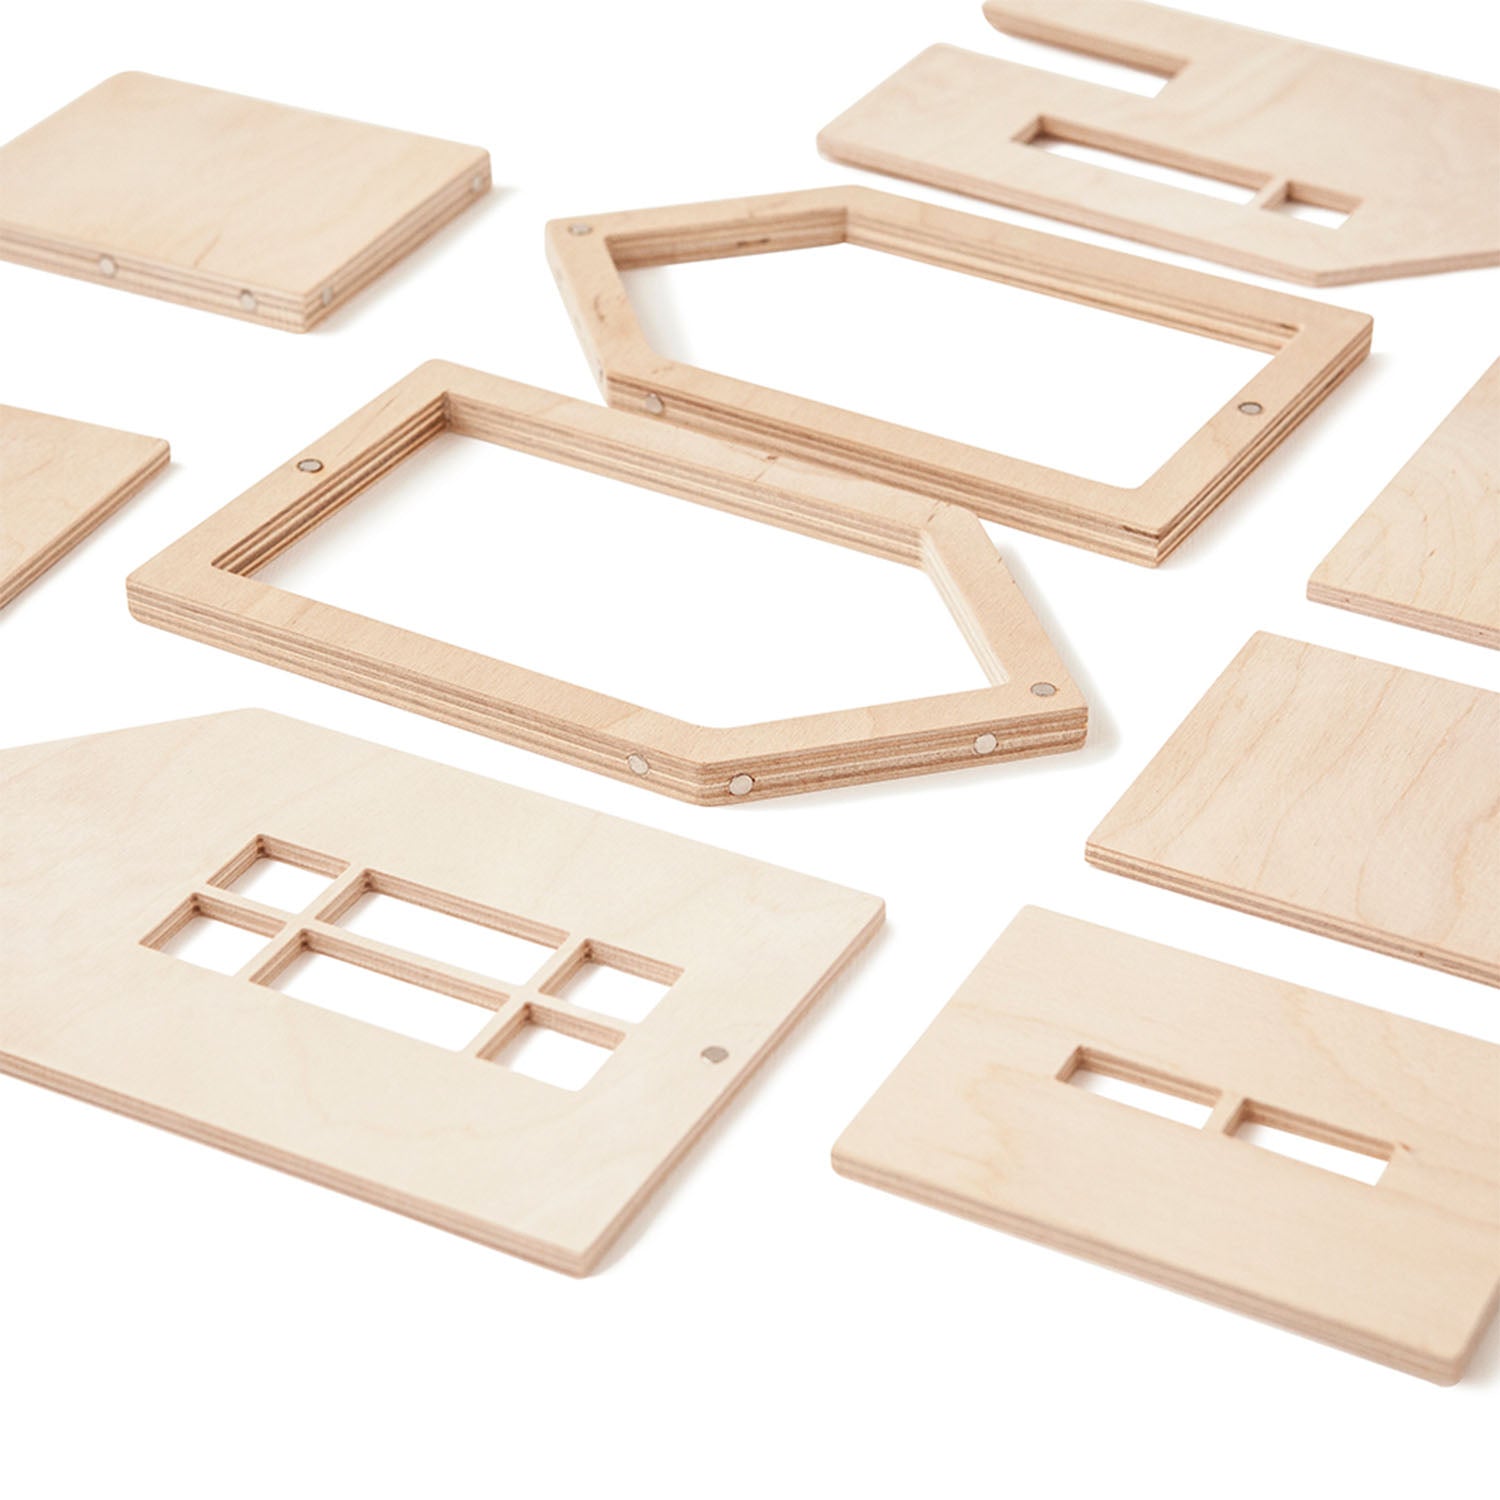 wooden dollhouse pieces laid flat